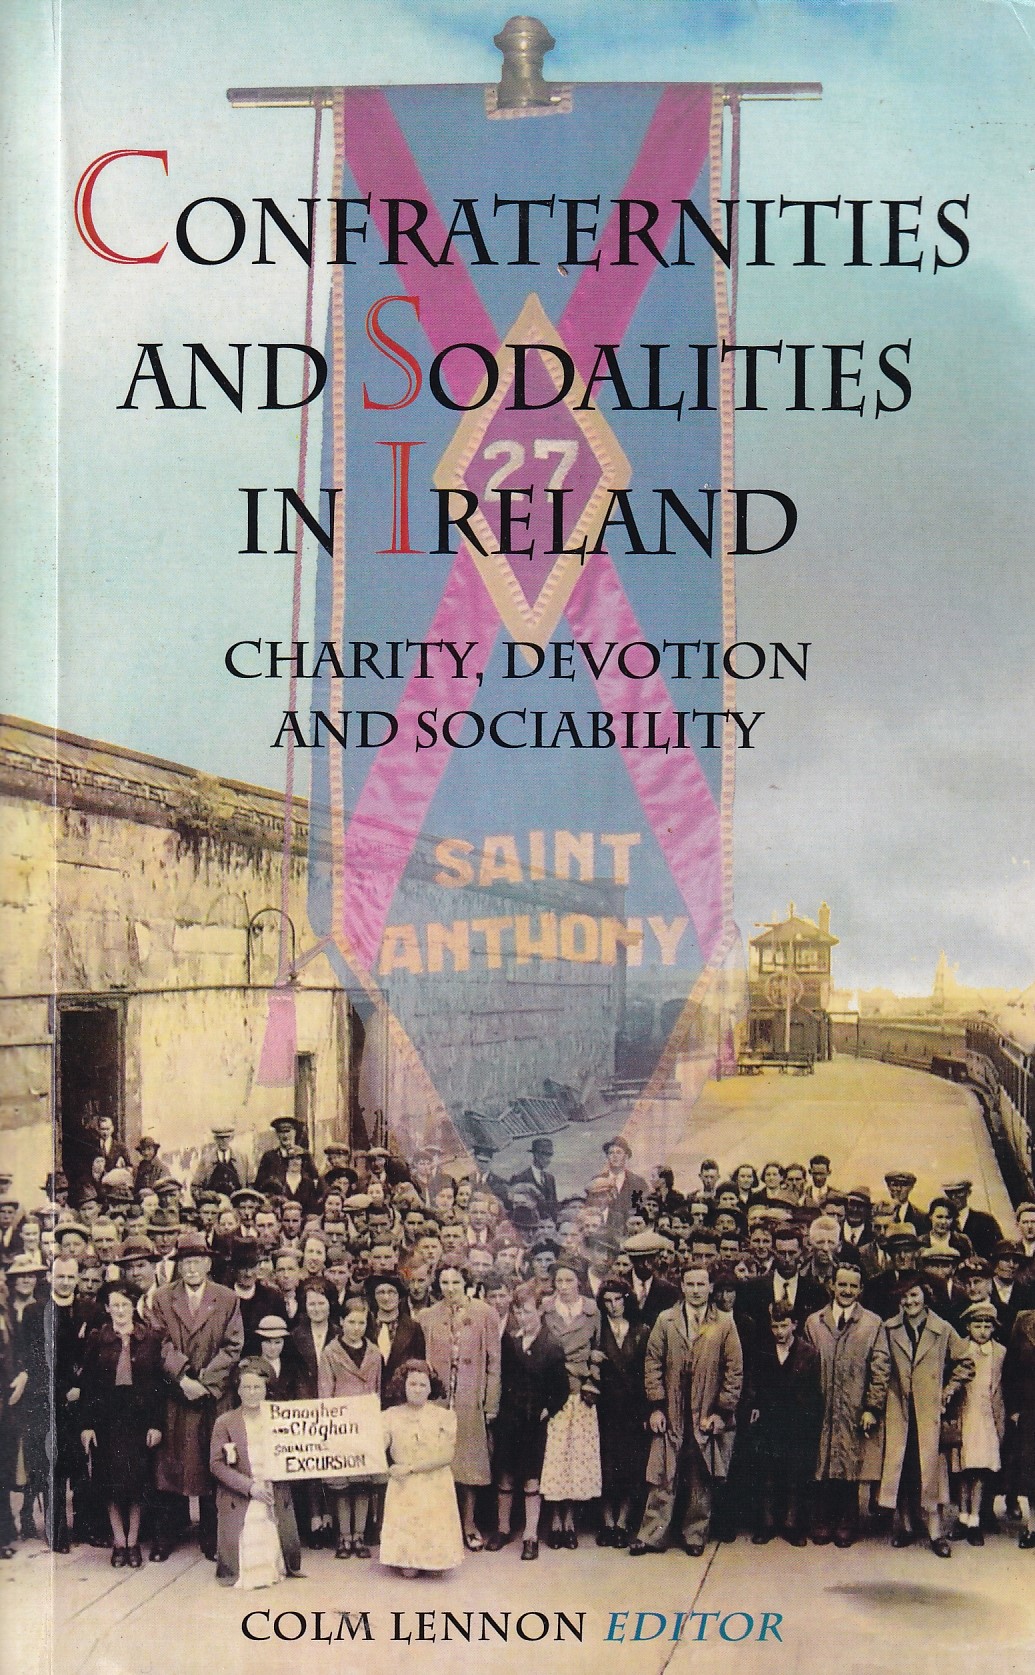 Confraternities and Sodalities in Ireland: Charity, Devotion and Sociability | Colm Lennon (ed.) | Charlie Byrne's